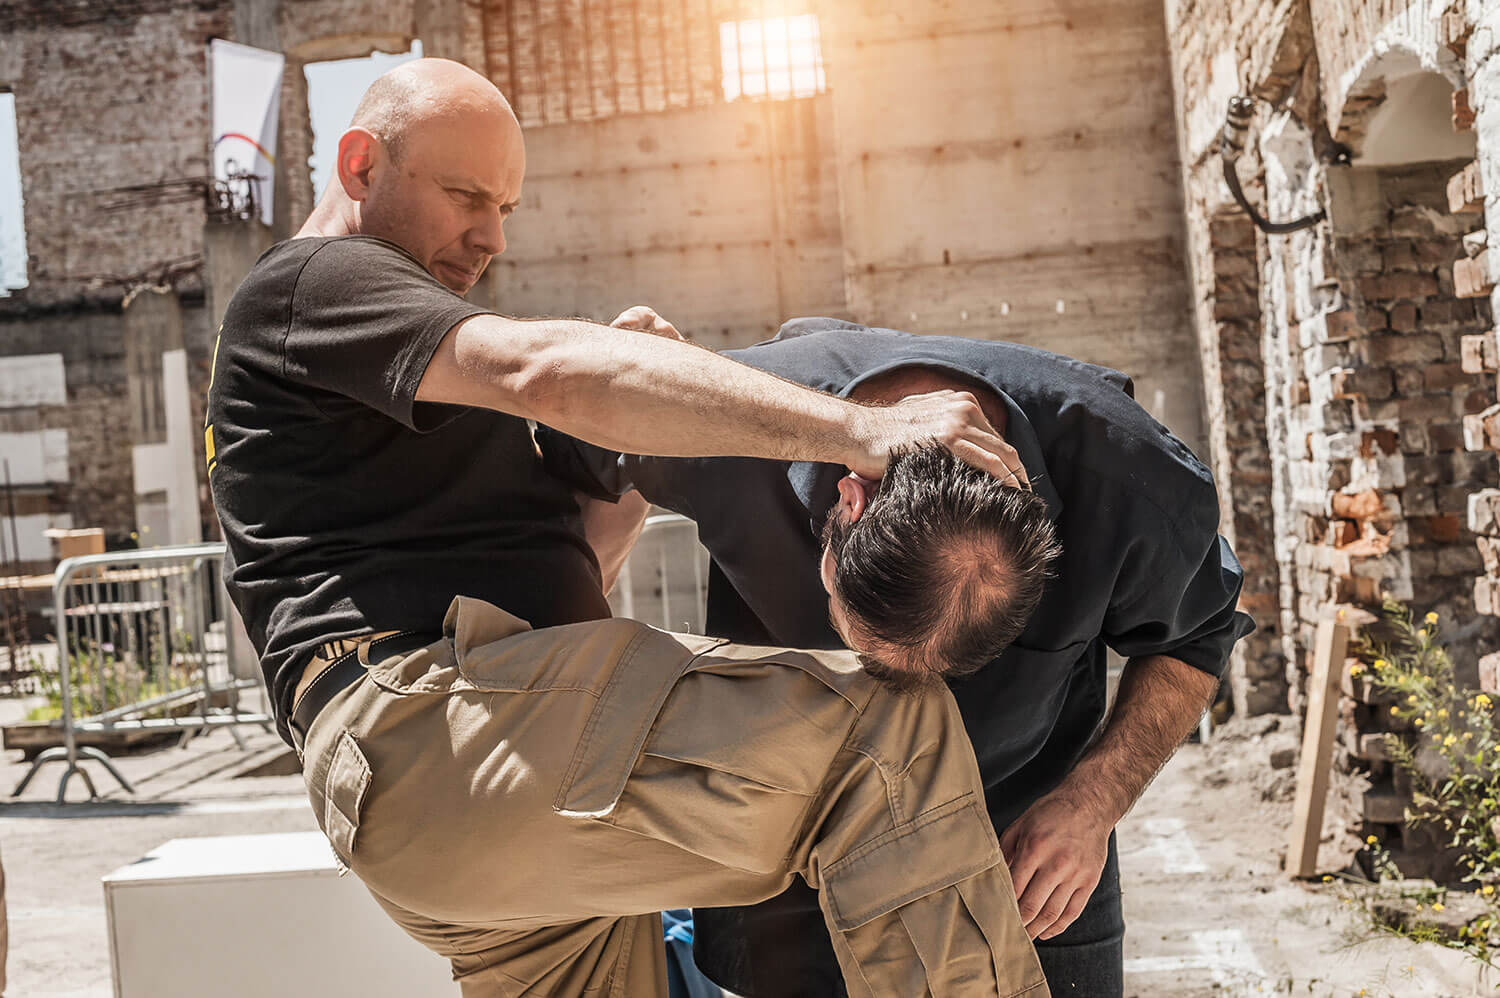 Unarmed Defensive Tactics with Ken Lewis of Prevent Prepare Protect Training and Consulting, formally of NPSI Training in San Antonio Texas.